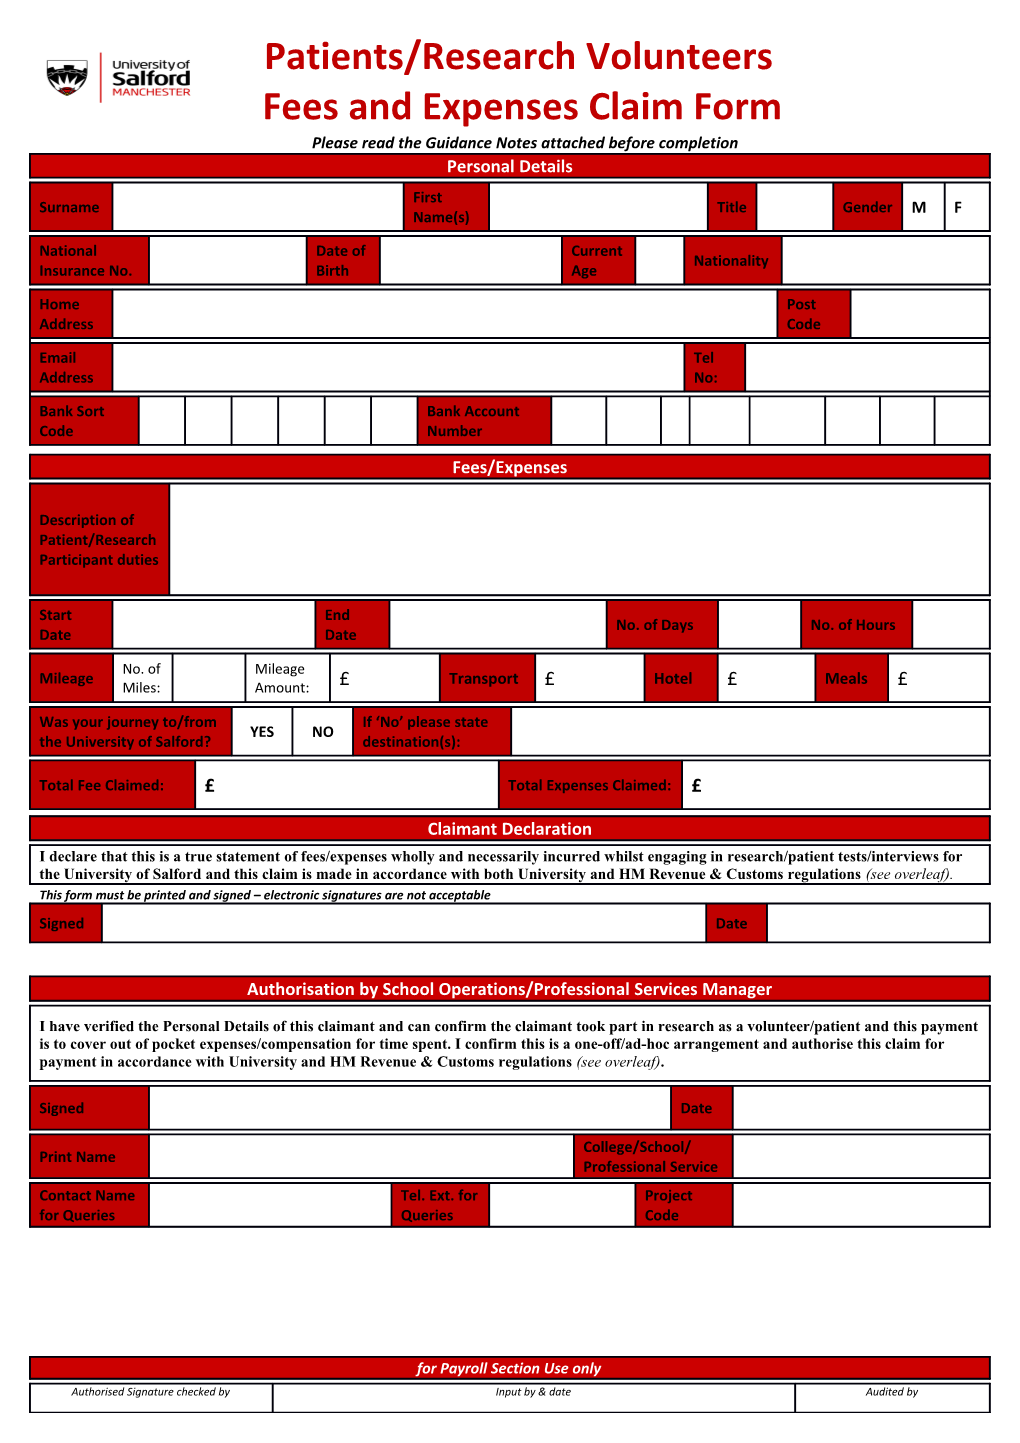 F Fees and Expenses Claim Form